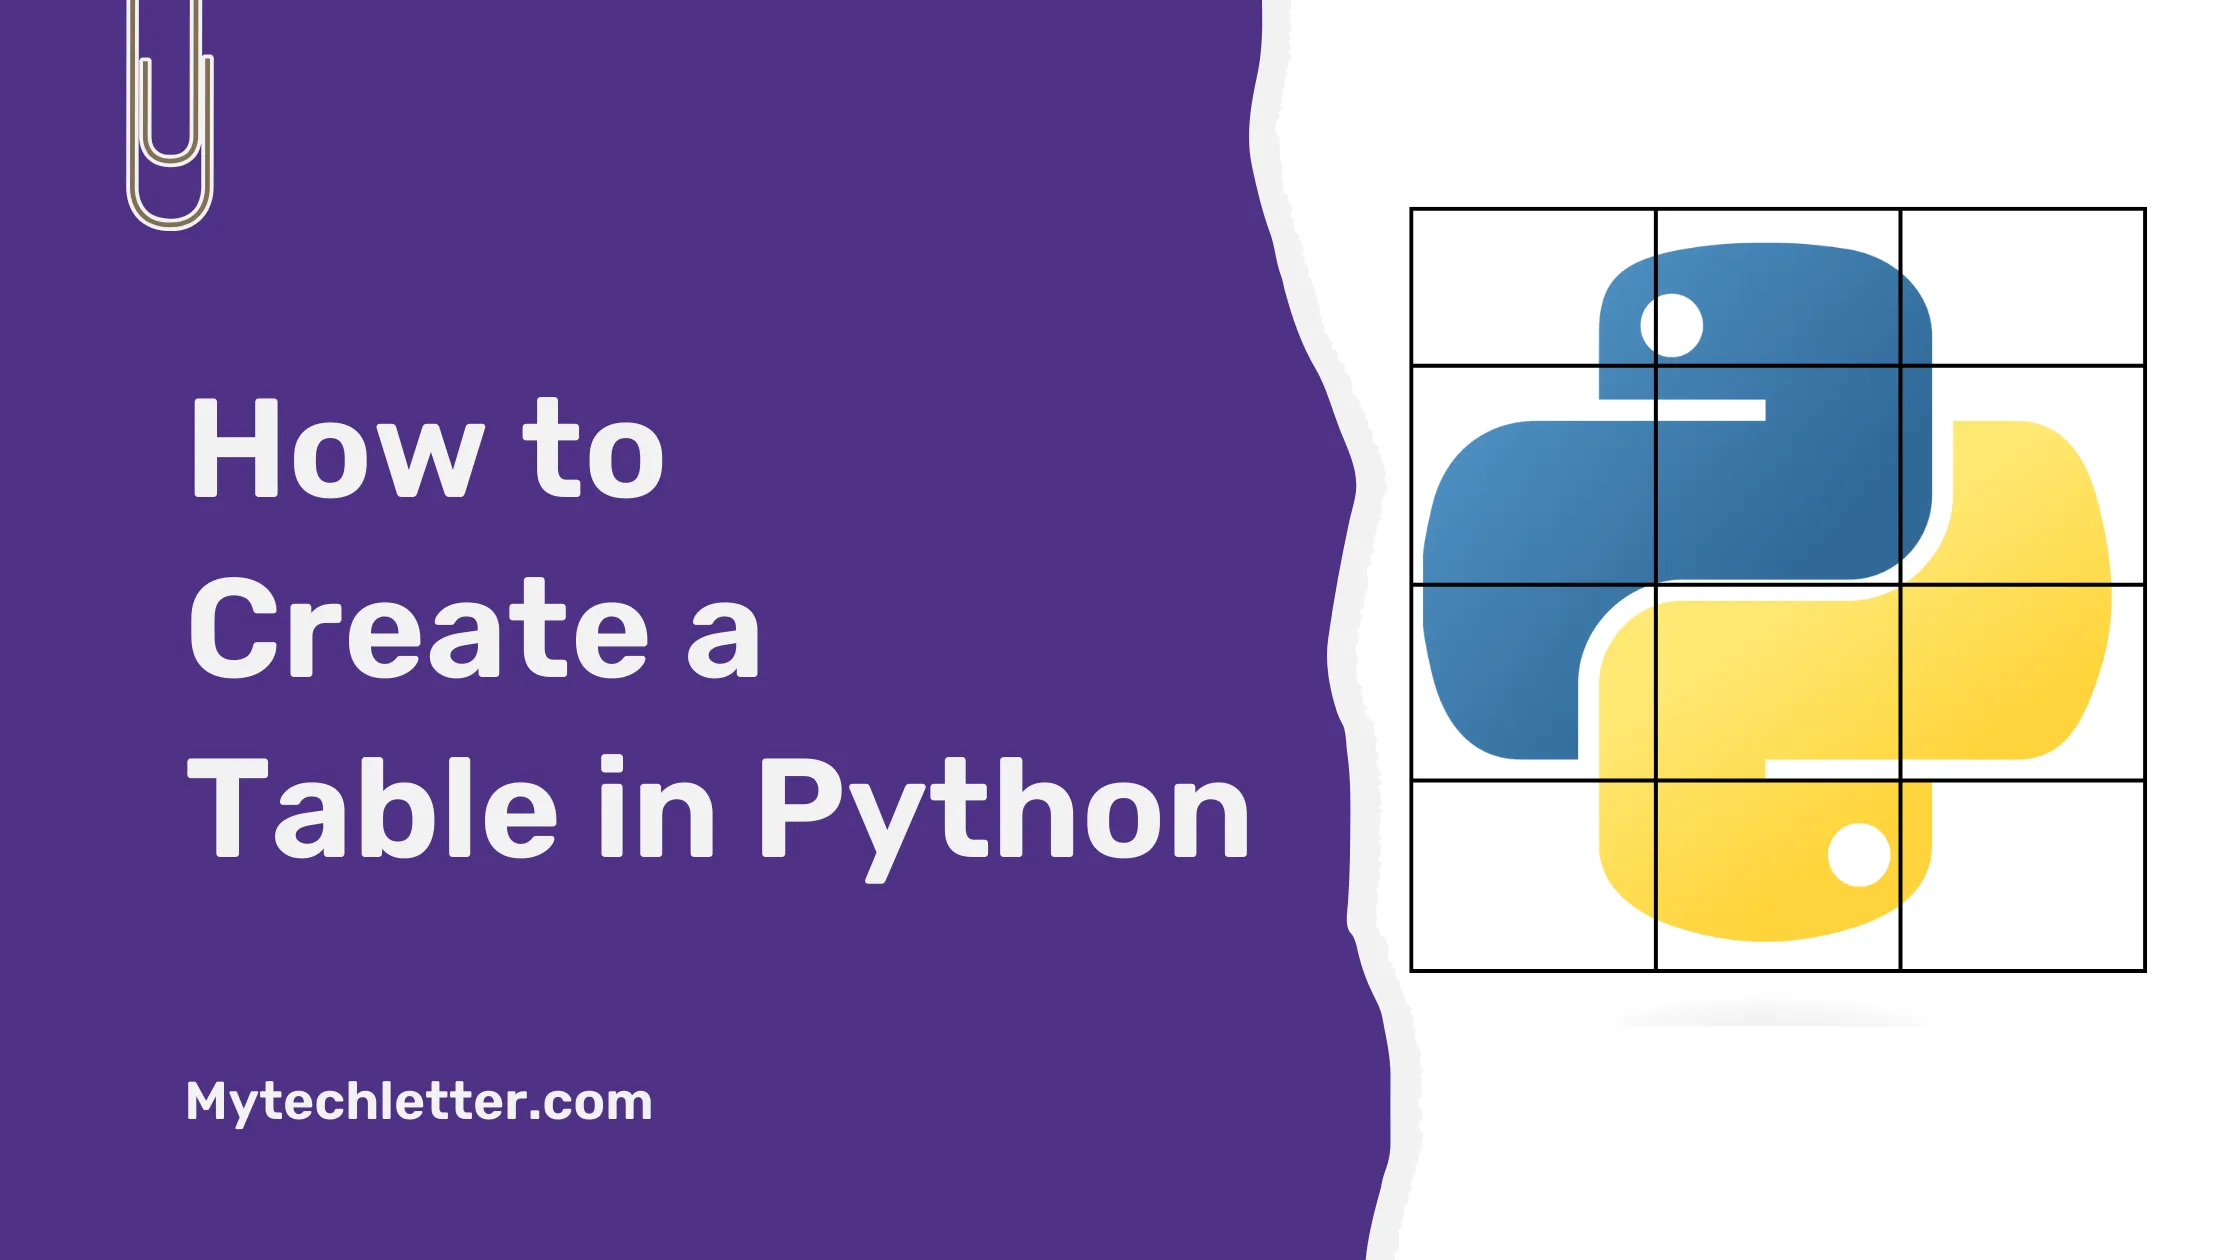 How to Create a Table in Python